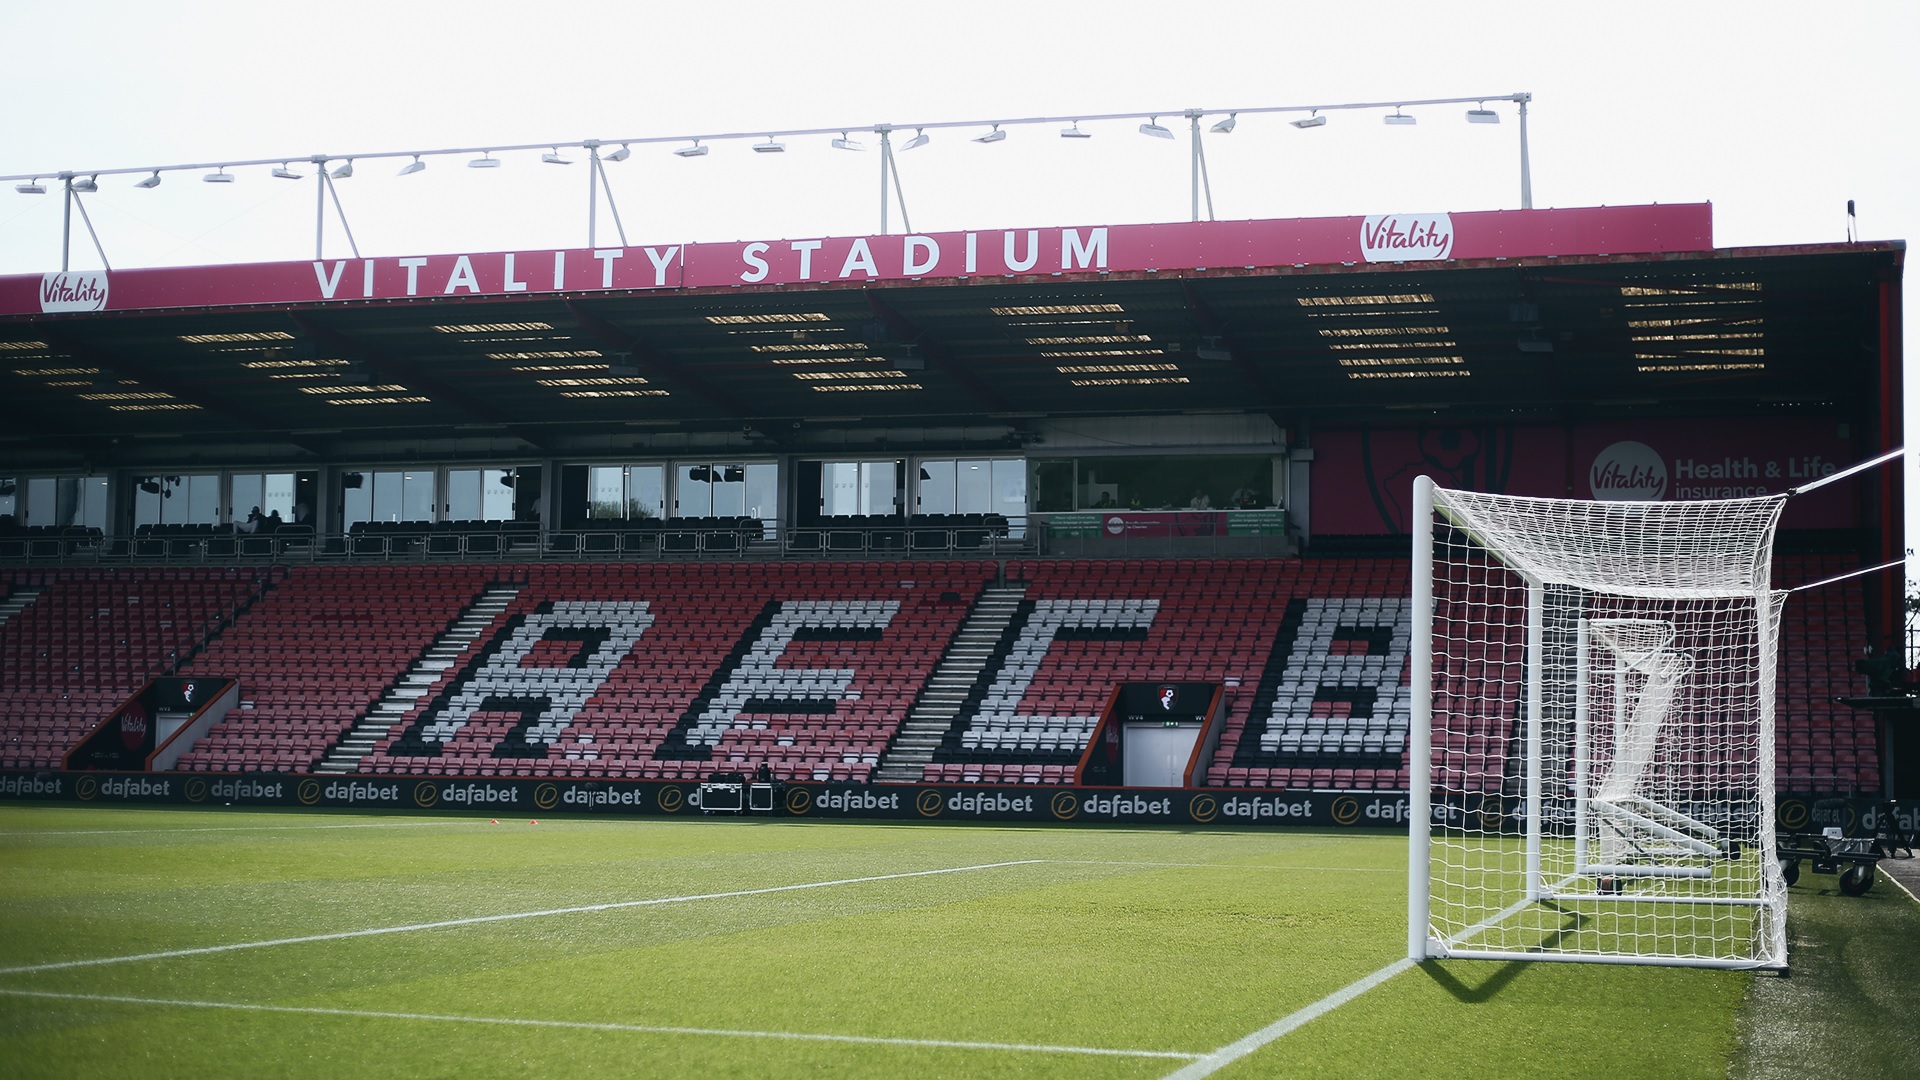 Bournemouth tickets: How to buy Bournemouth tickets for Premier League games at Vitality Stadium